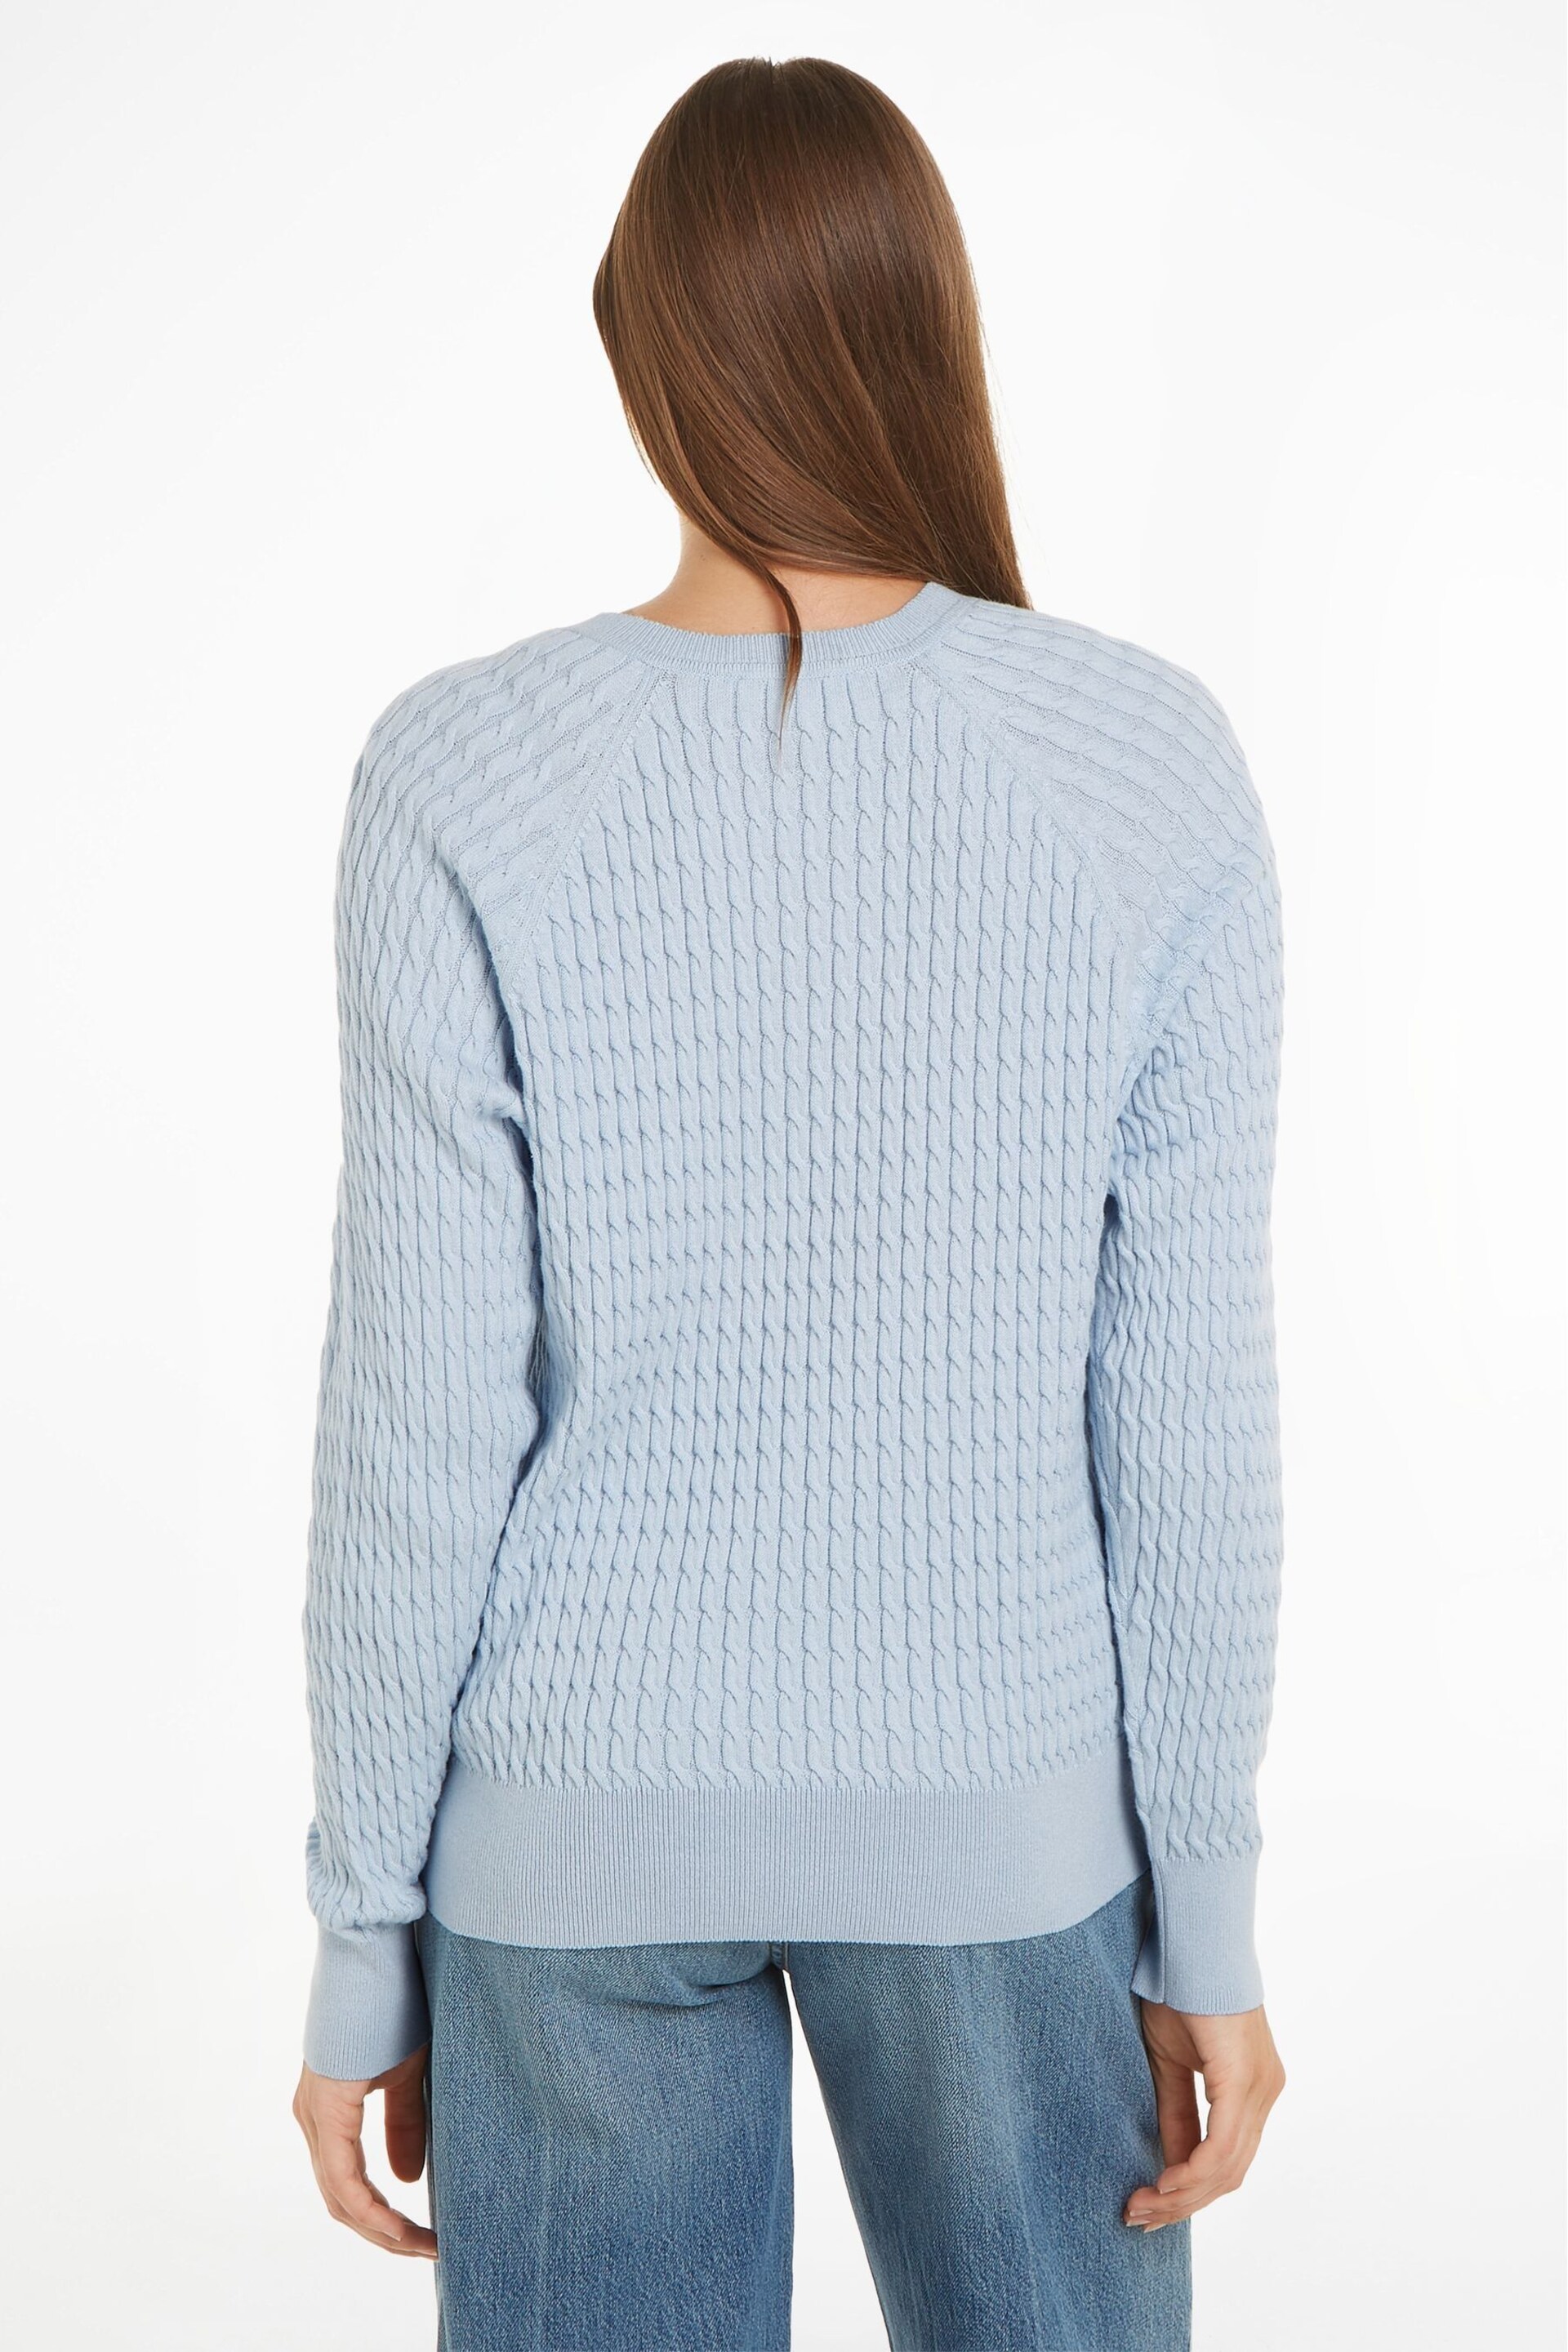 Tommy Hilfiger Blue Cable Knit Sweater - Image 2 of 6